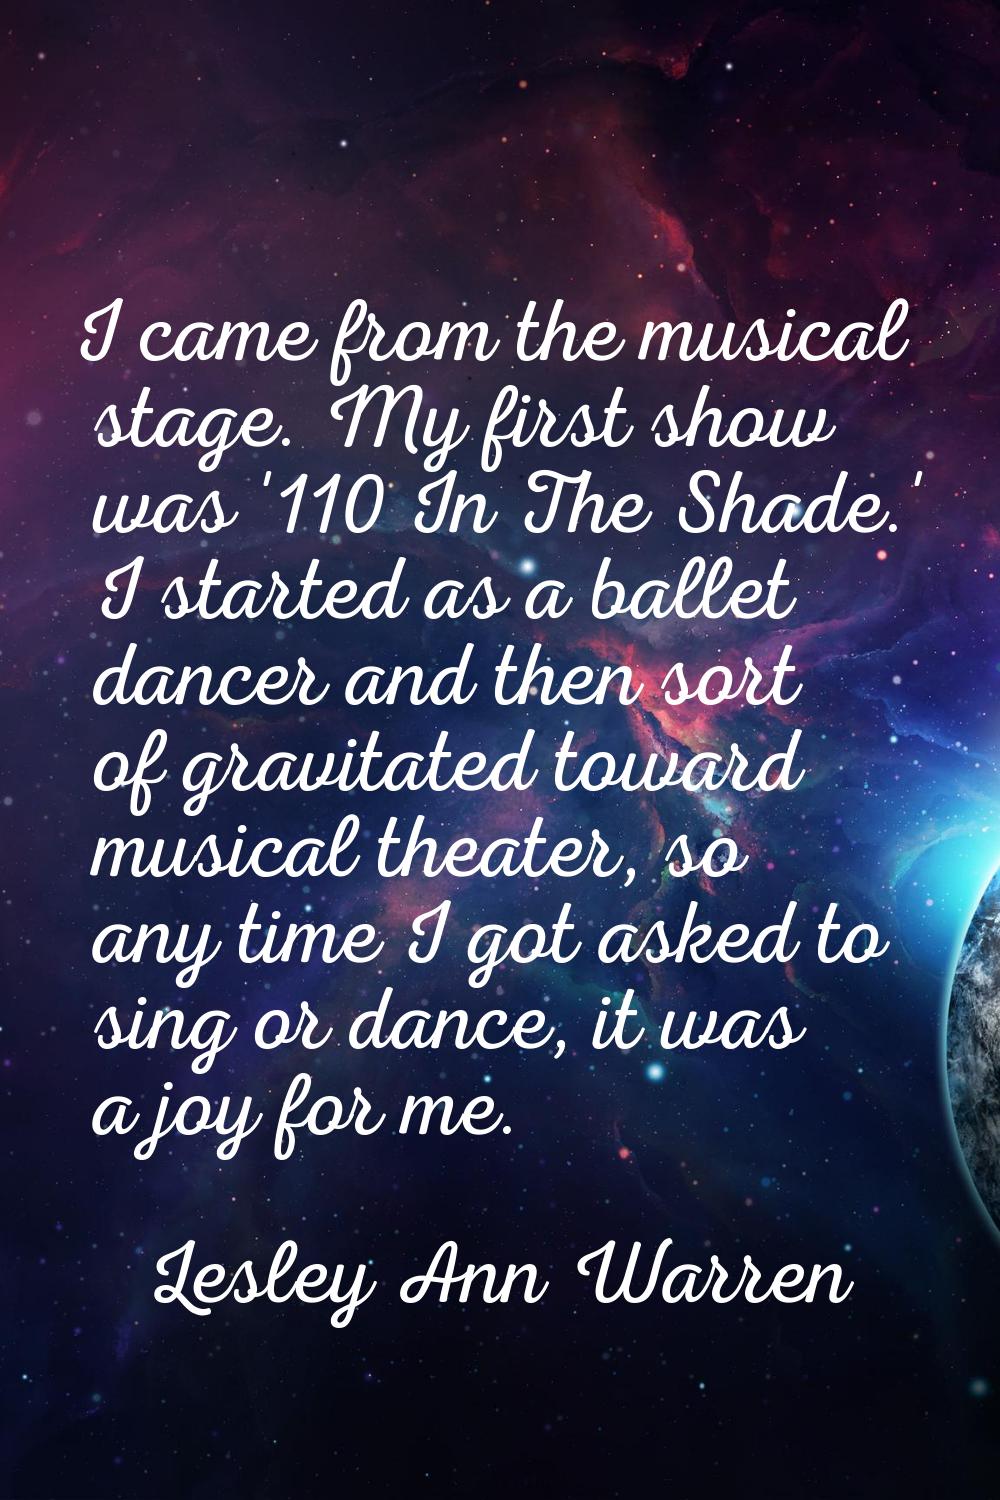 I came from the musical stage. My first show was '110 In The Shade.' I started as a ballet dancer a